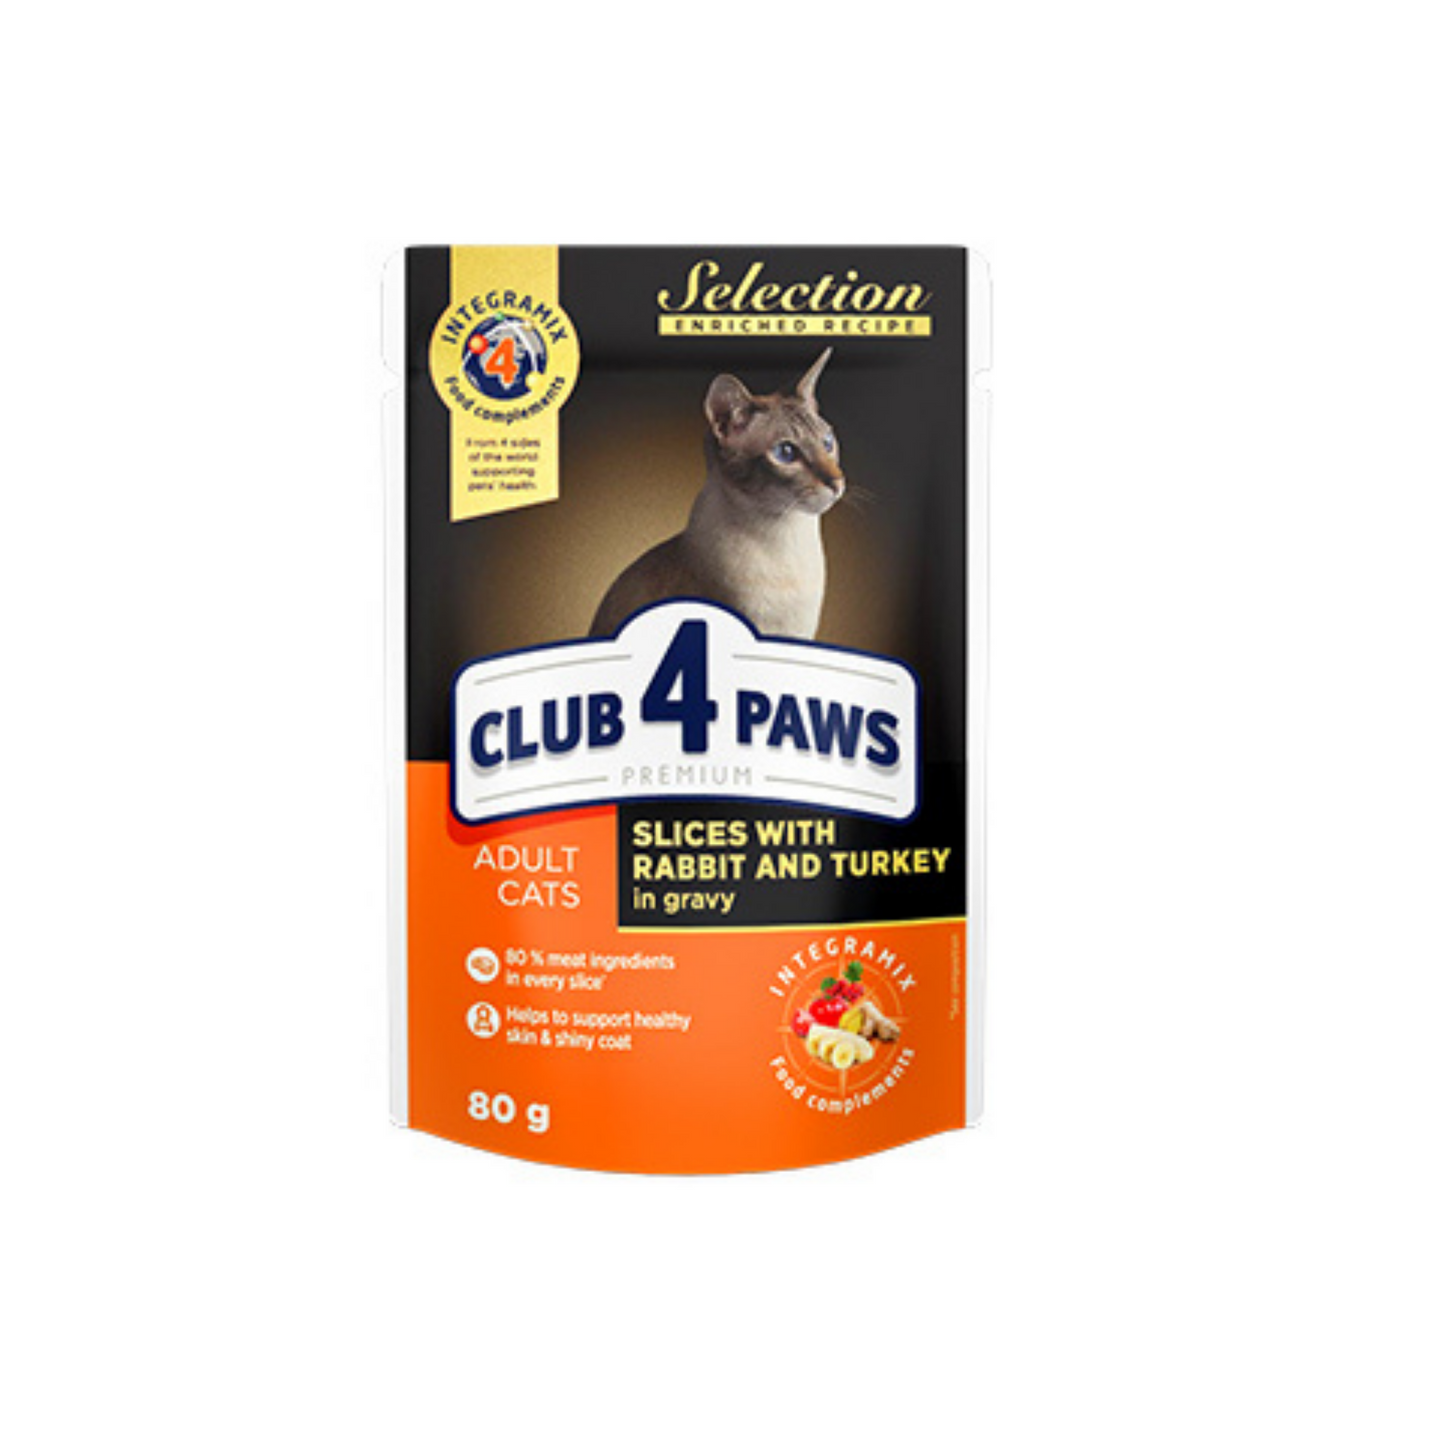 CLUB 4 PAWS Premium Selected with Rabbit & Turkey in Gravy